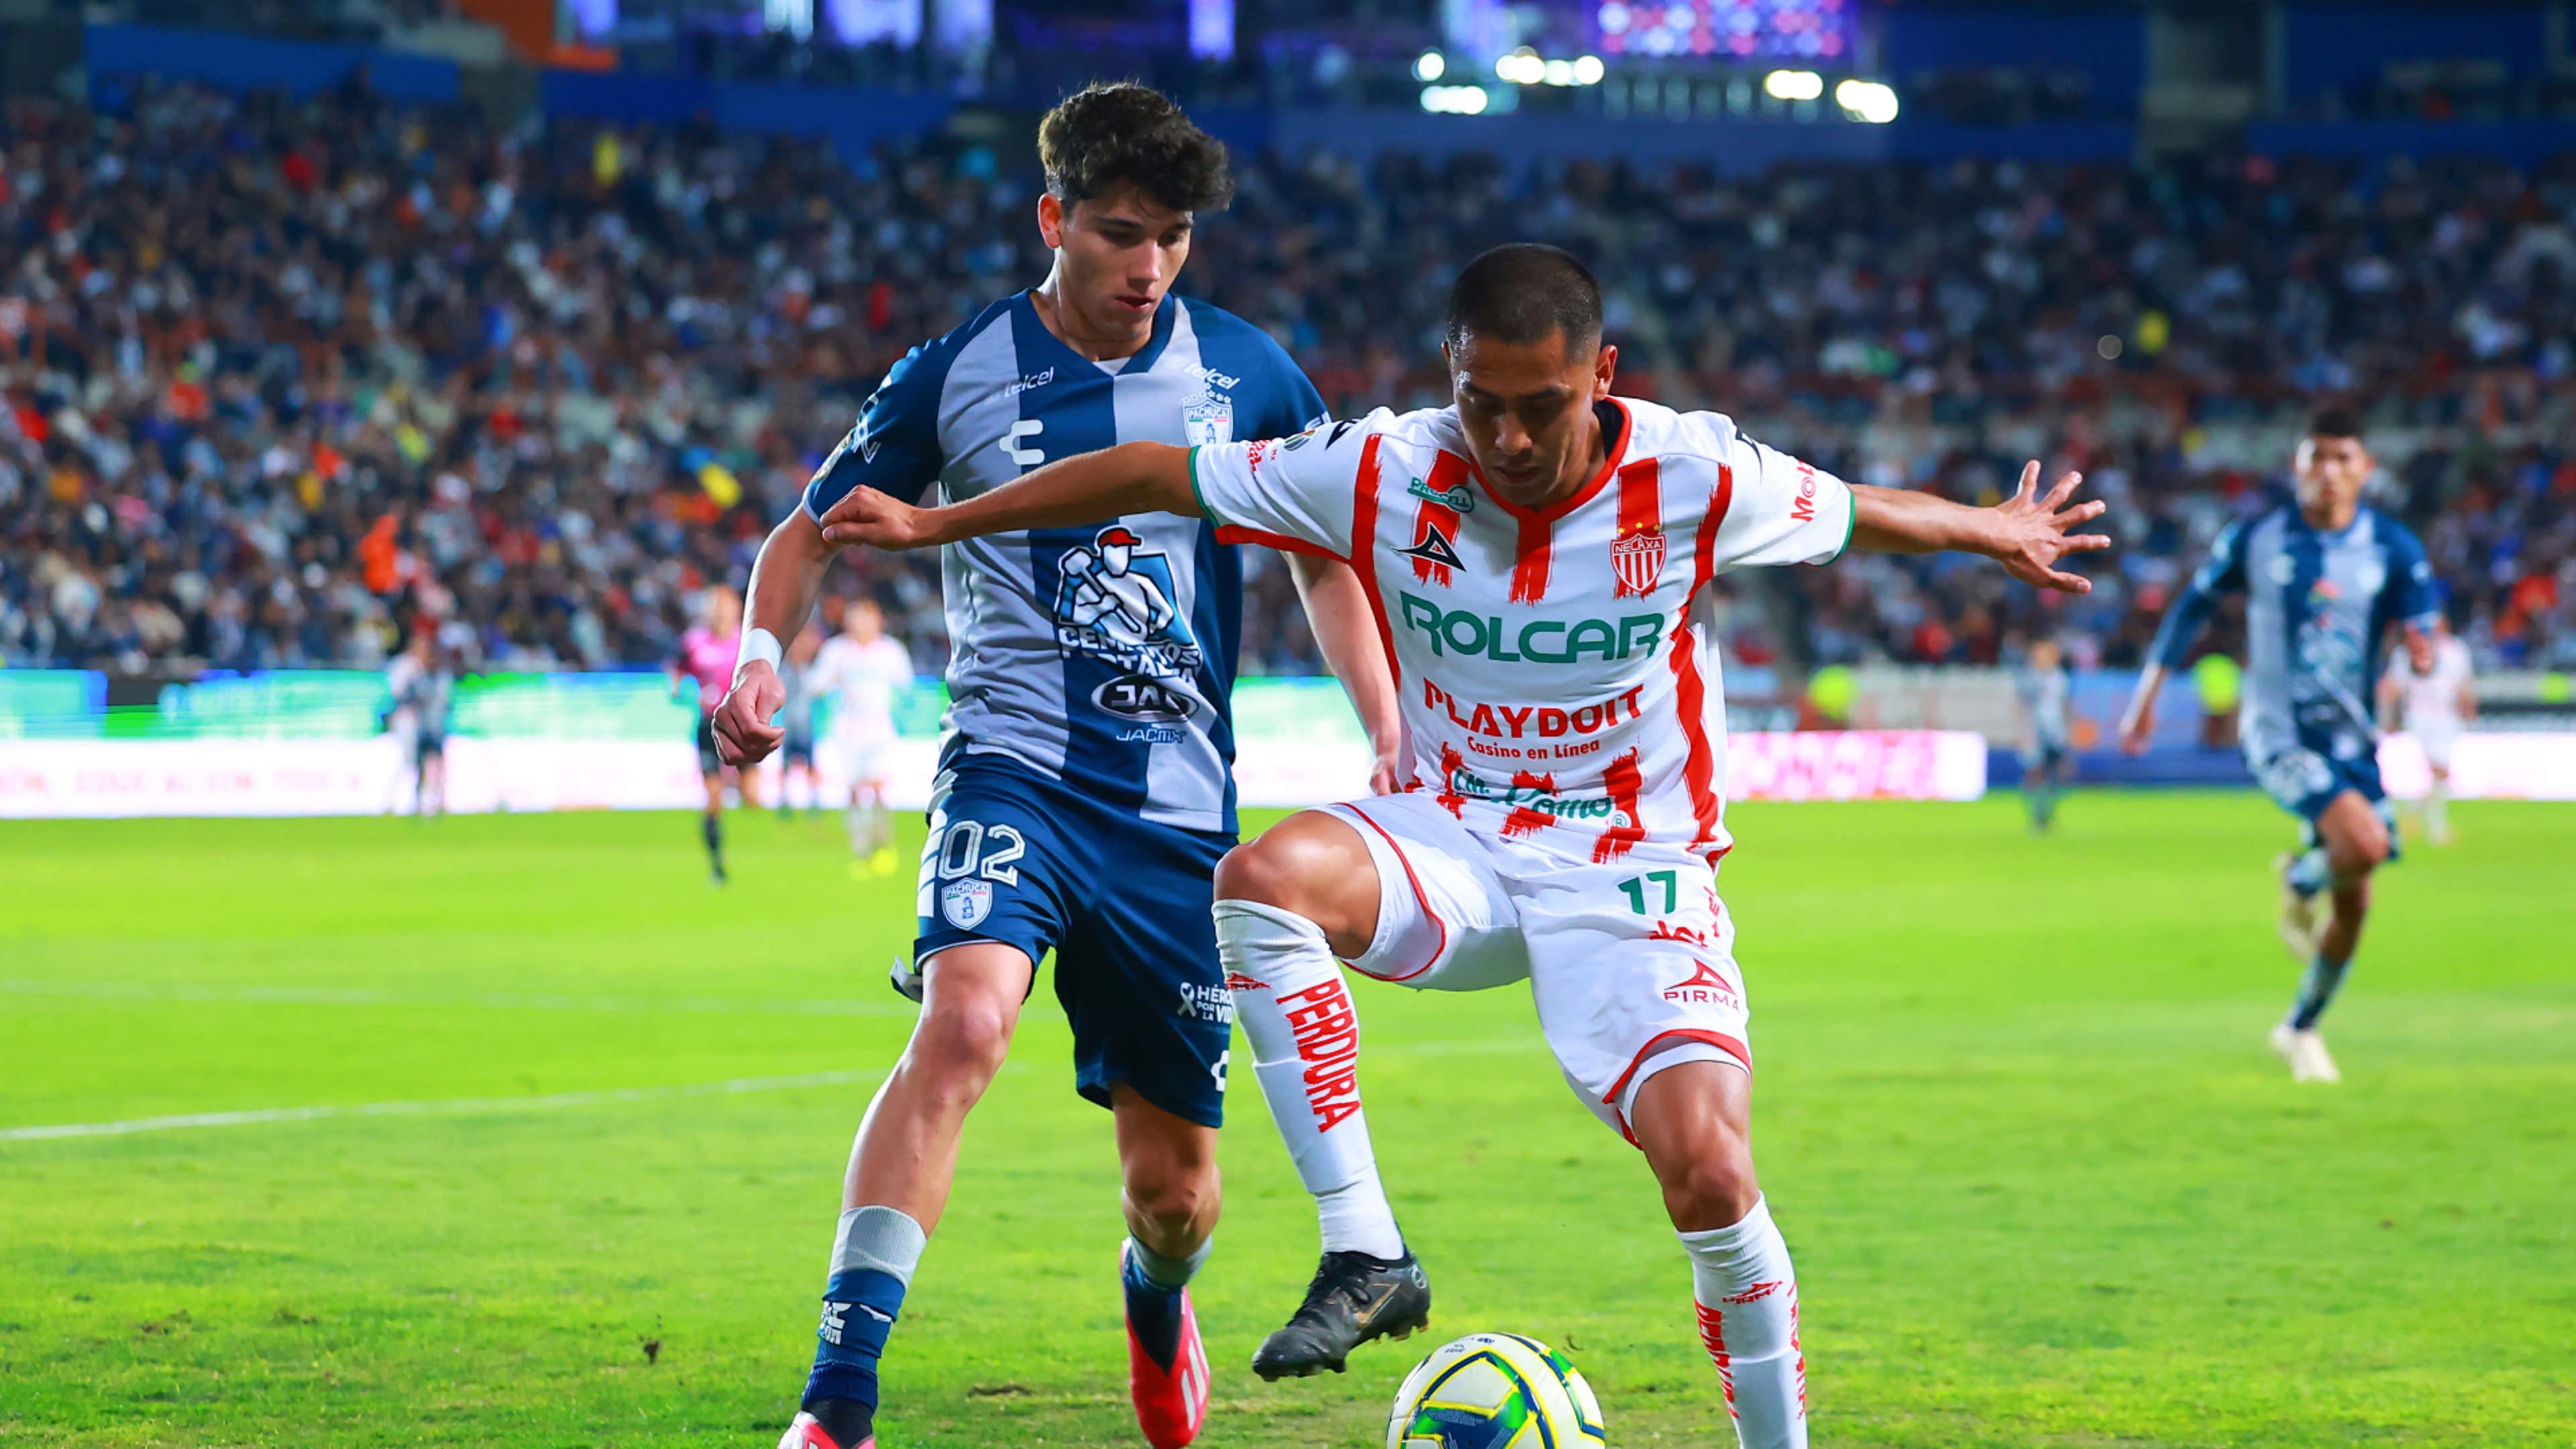 How to Watch Liga MX Streaming Live in the US Today - November 30